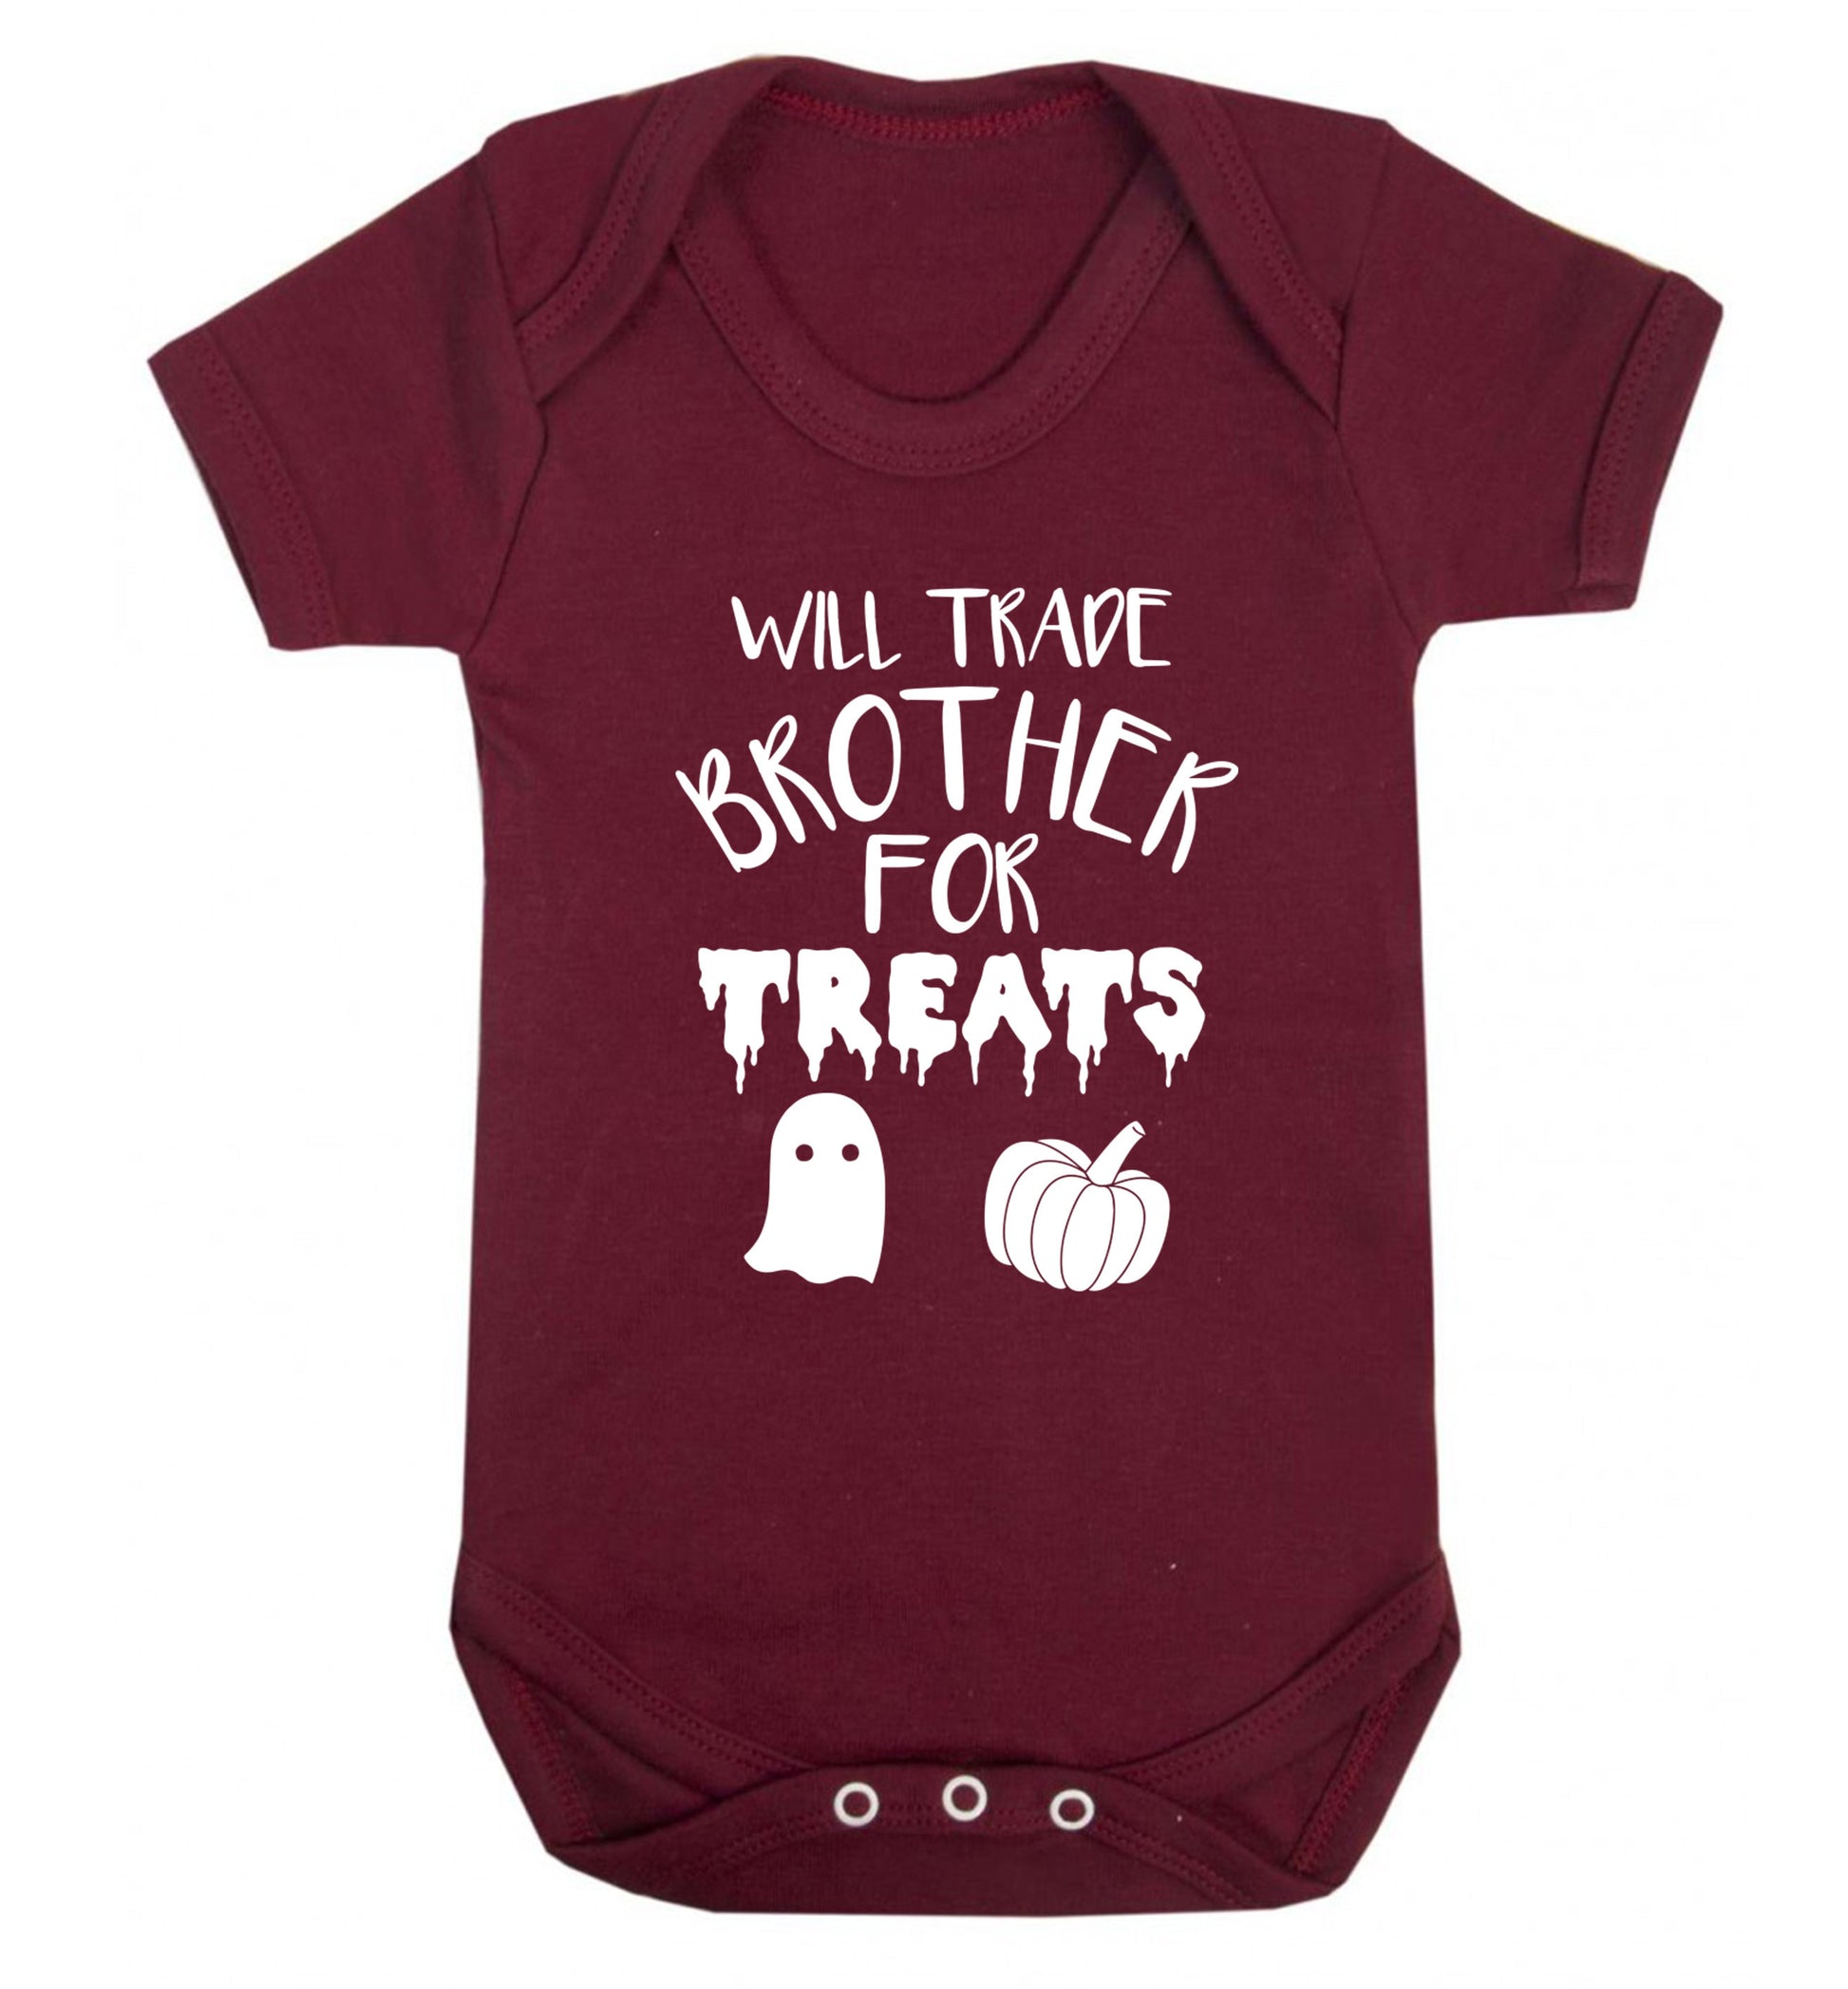 Will trade brother for treats Baby Vest maroon 18-24 months